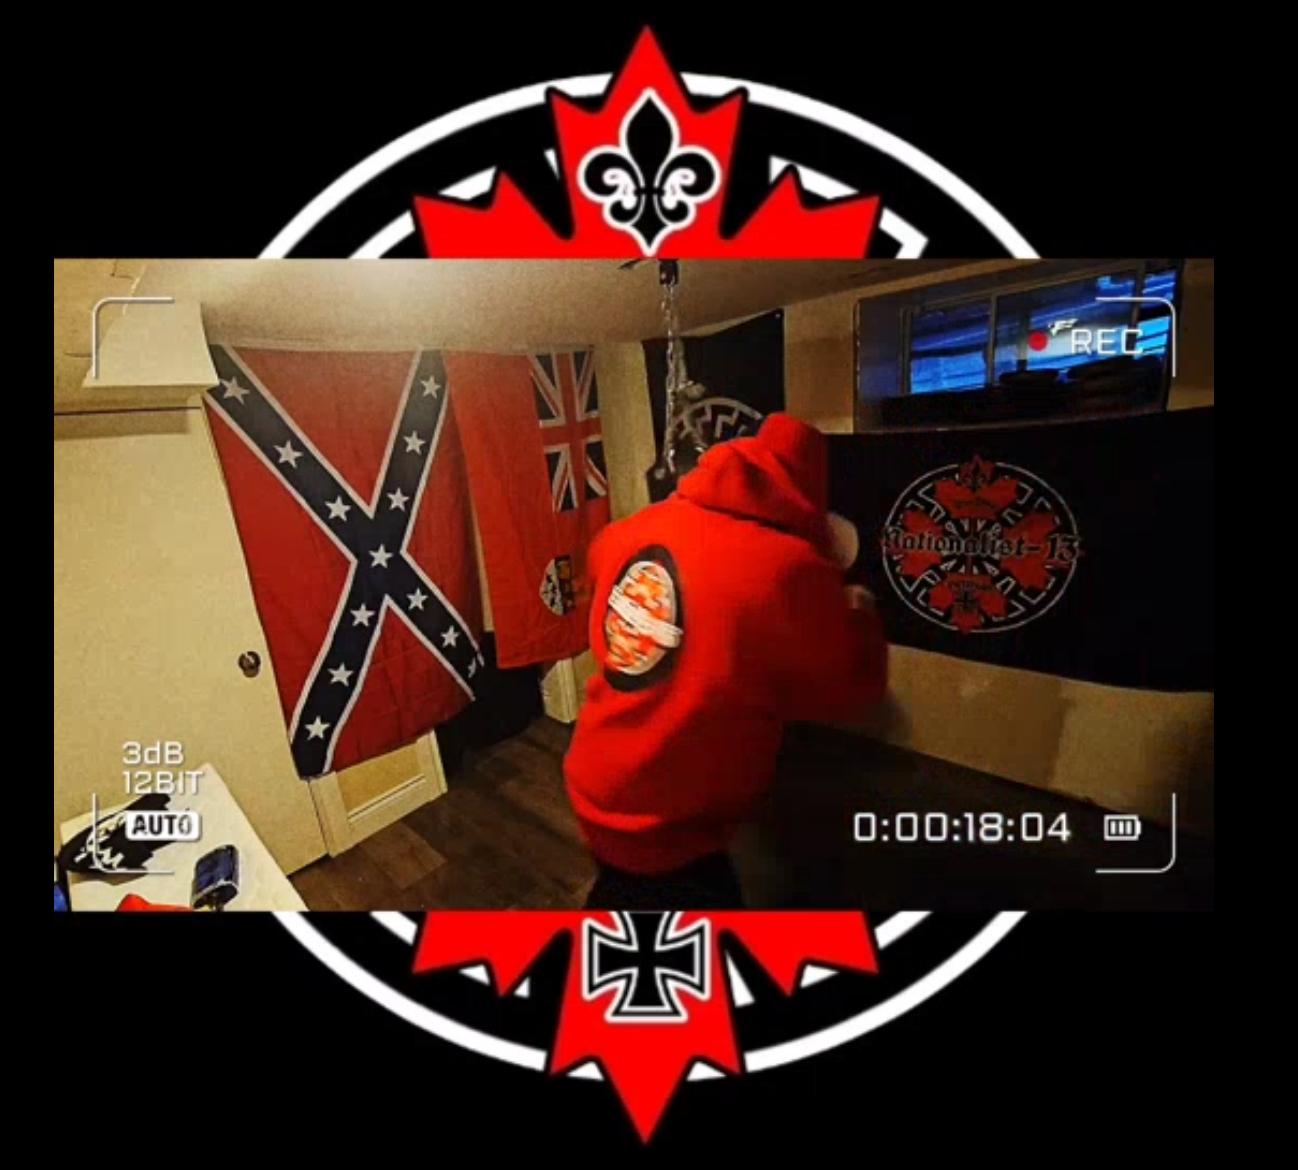 Brandon Lapointe in a Nationalist-13 video in his basement with a Sonnerad flag and Confederate flag and Nationalist-13 flag